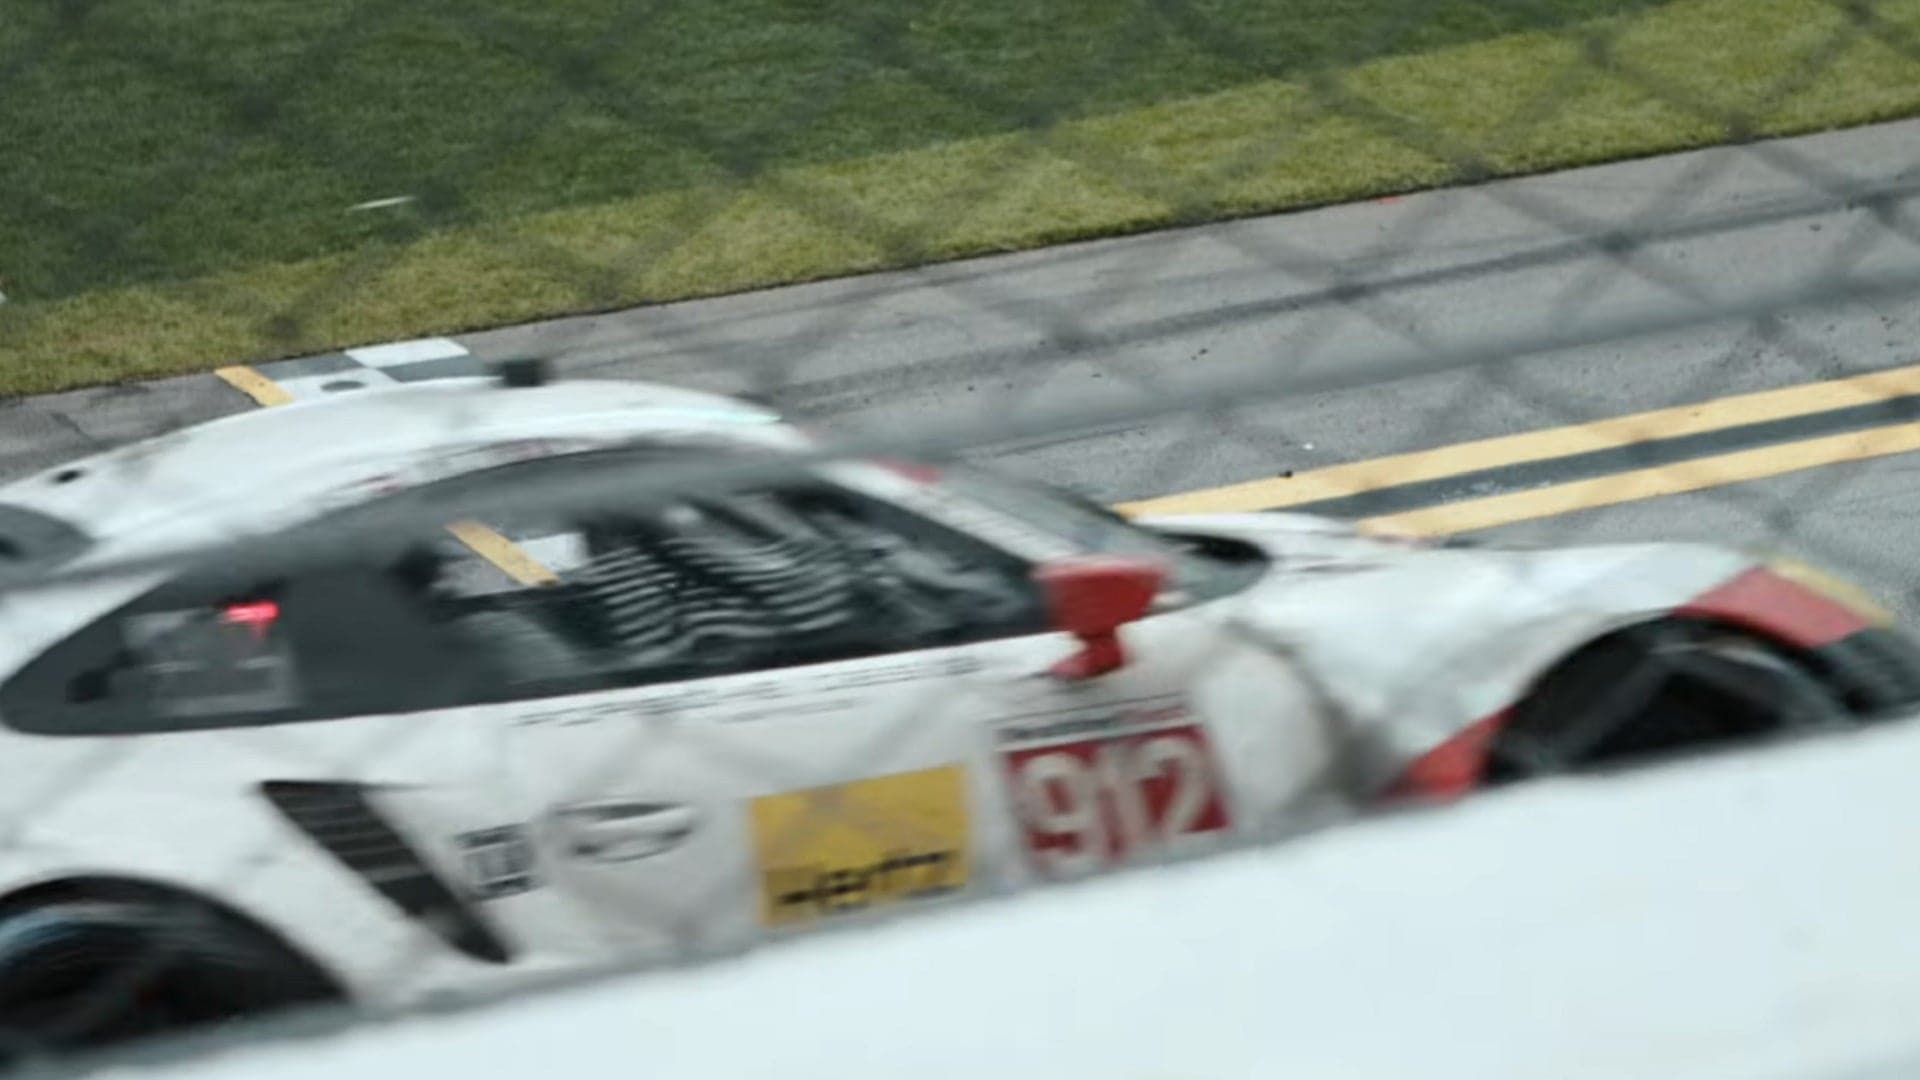 Porsche Shows Their Daytona 24 Experience From Three Different Perspectives